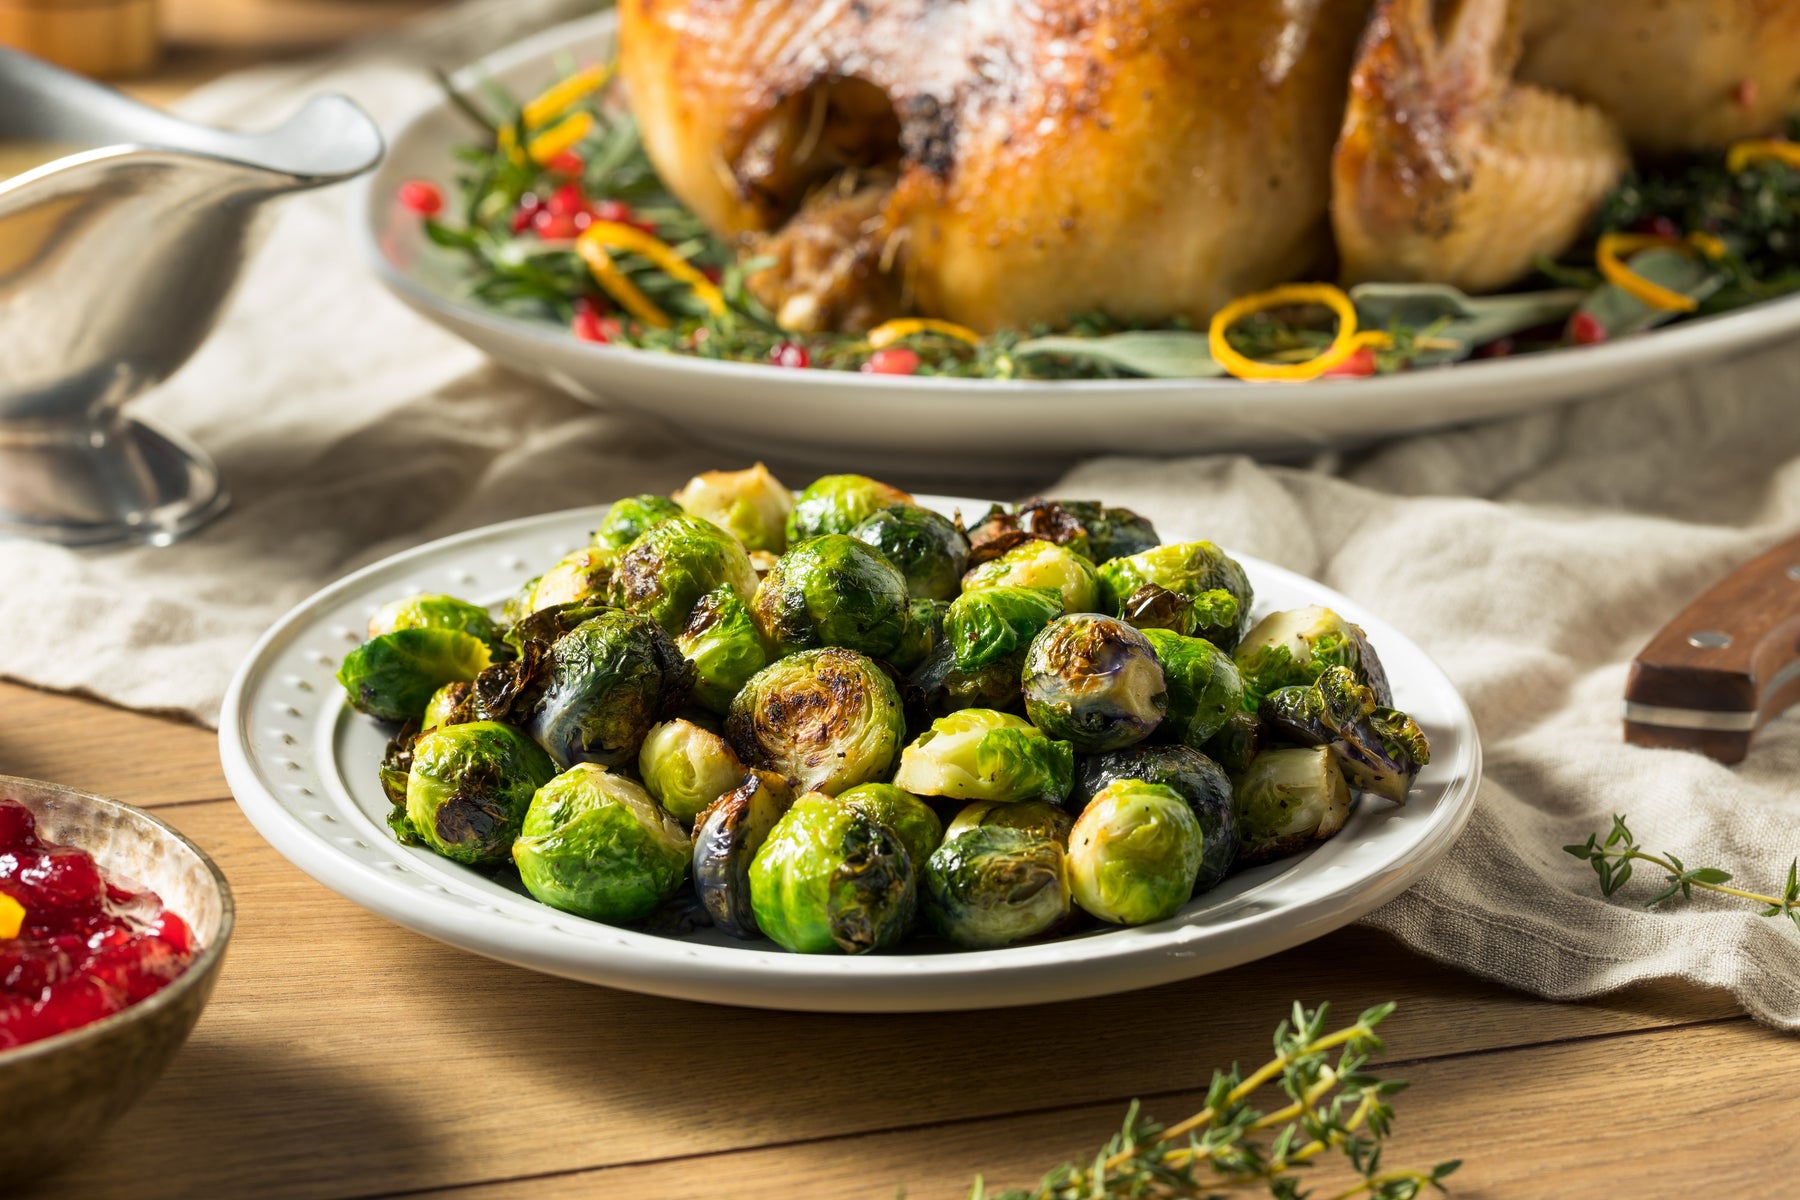 How to Make Lemon Garlic Roasted Brussels Sprouts